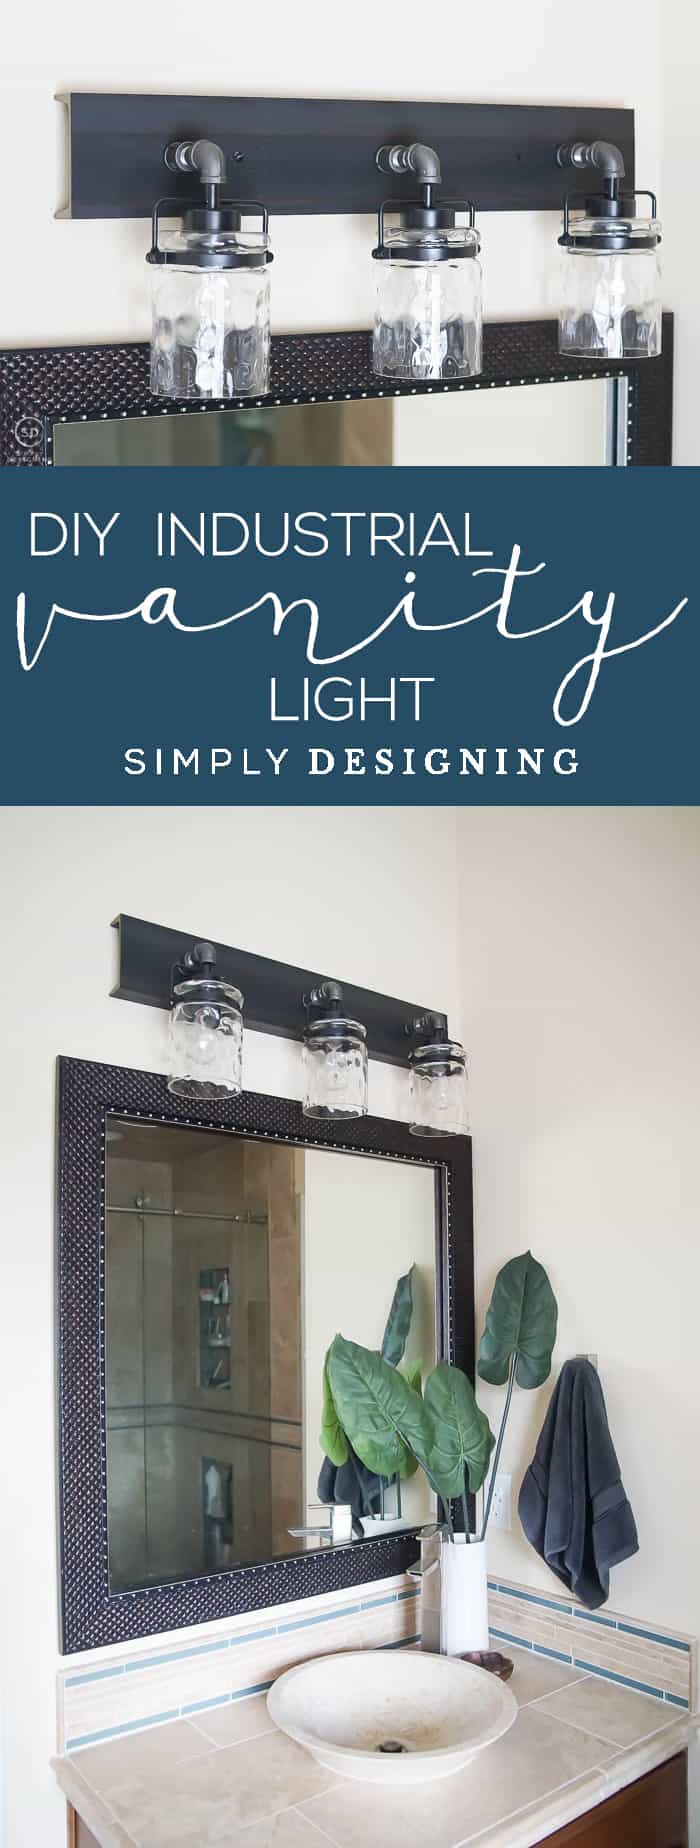 Industrial DIY Vanity Light - this amazing vanity light is easy to make and makes a beautiful statement in your bathroom - DIY Industrial Light